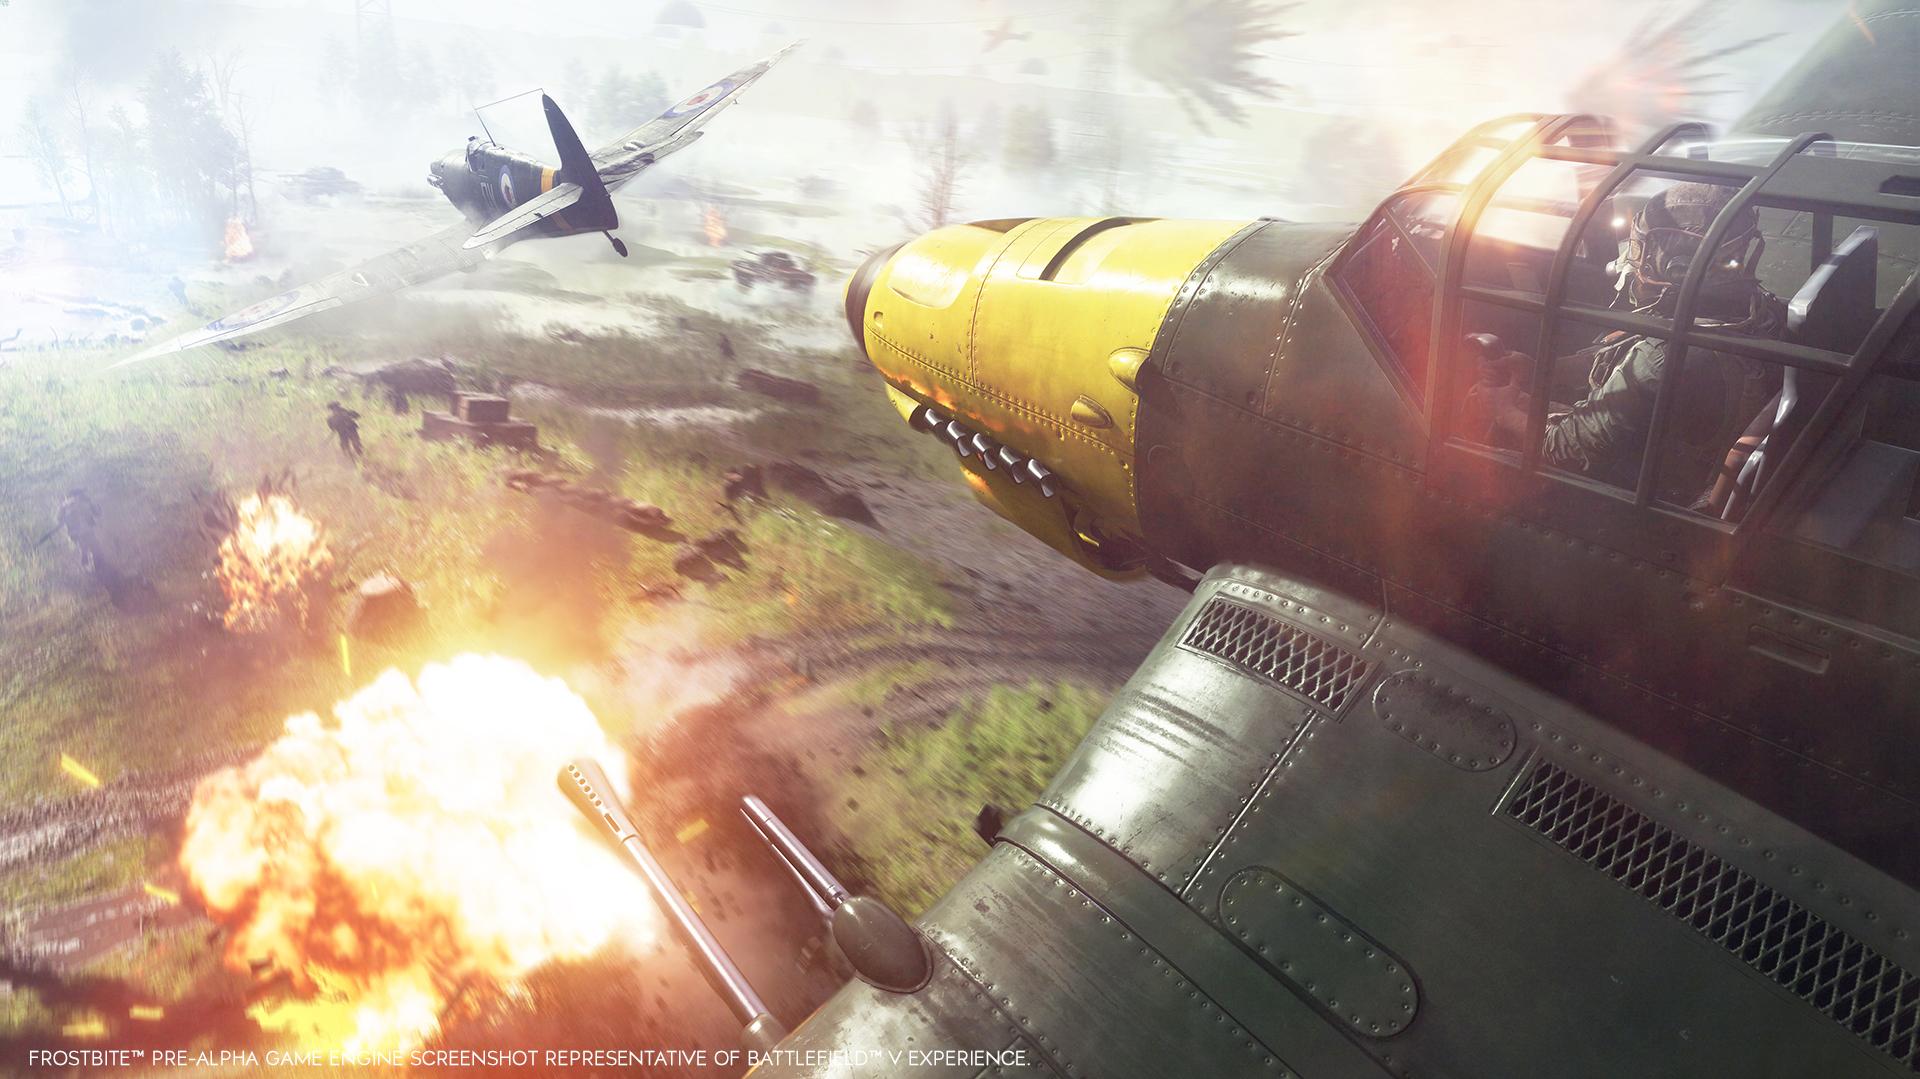 How Battlefield V Will Depict WWII as You Have Never Seen It